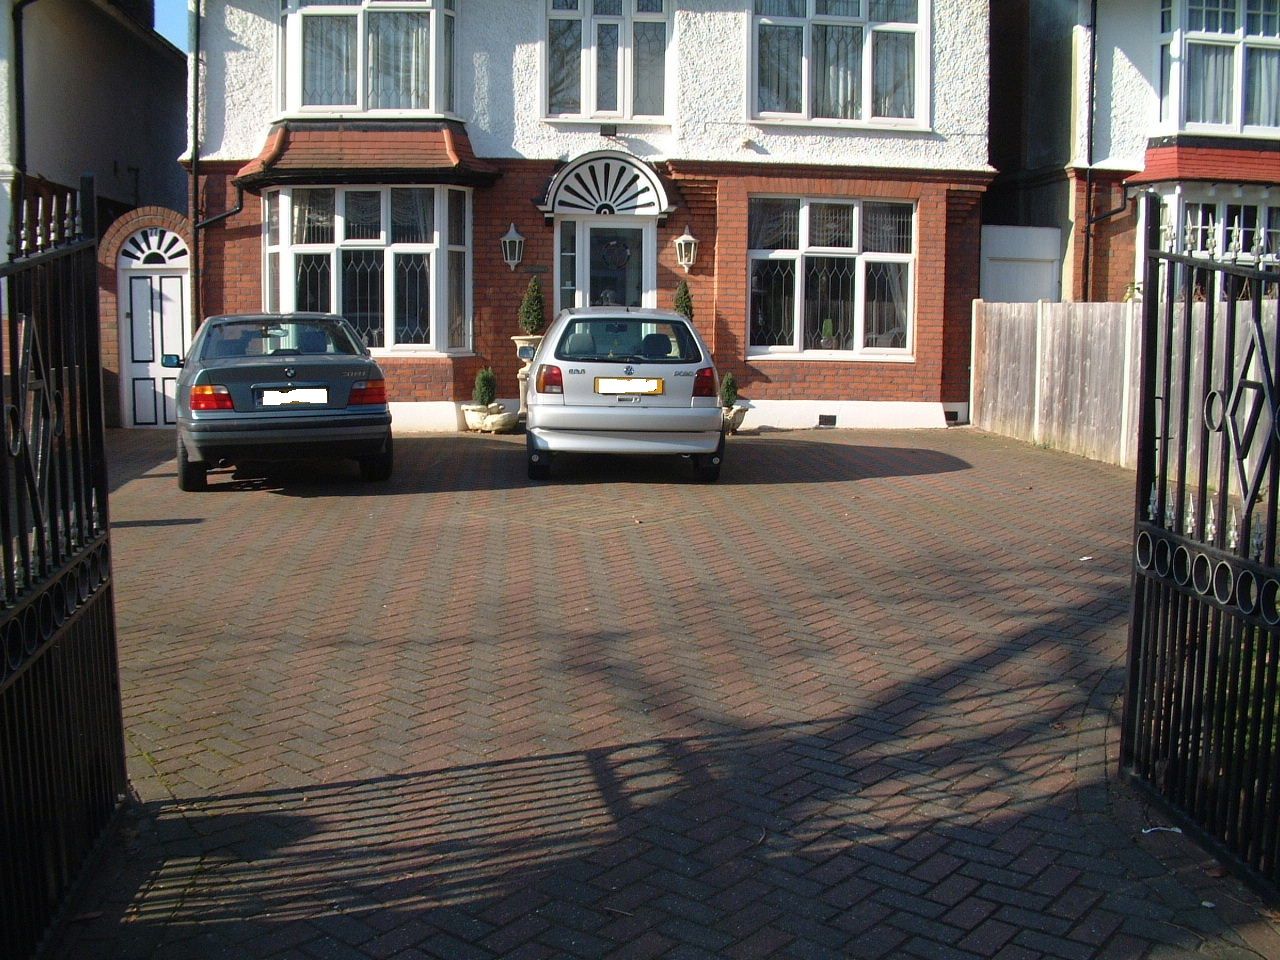 Photo of a  completely bricked-over front garden in Ealing taken in 2003